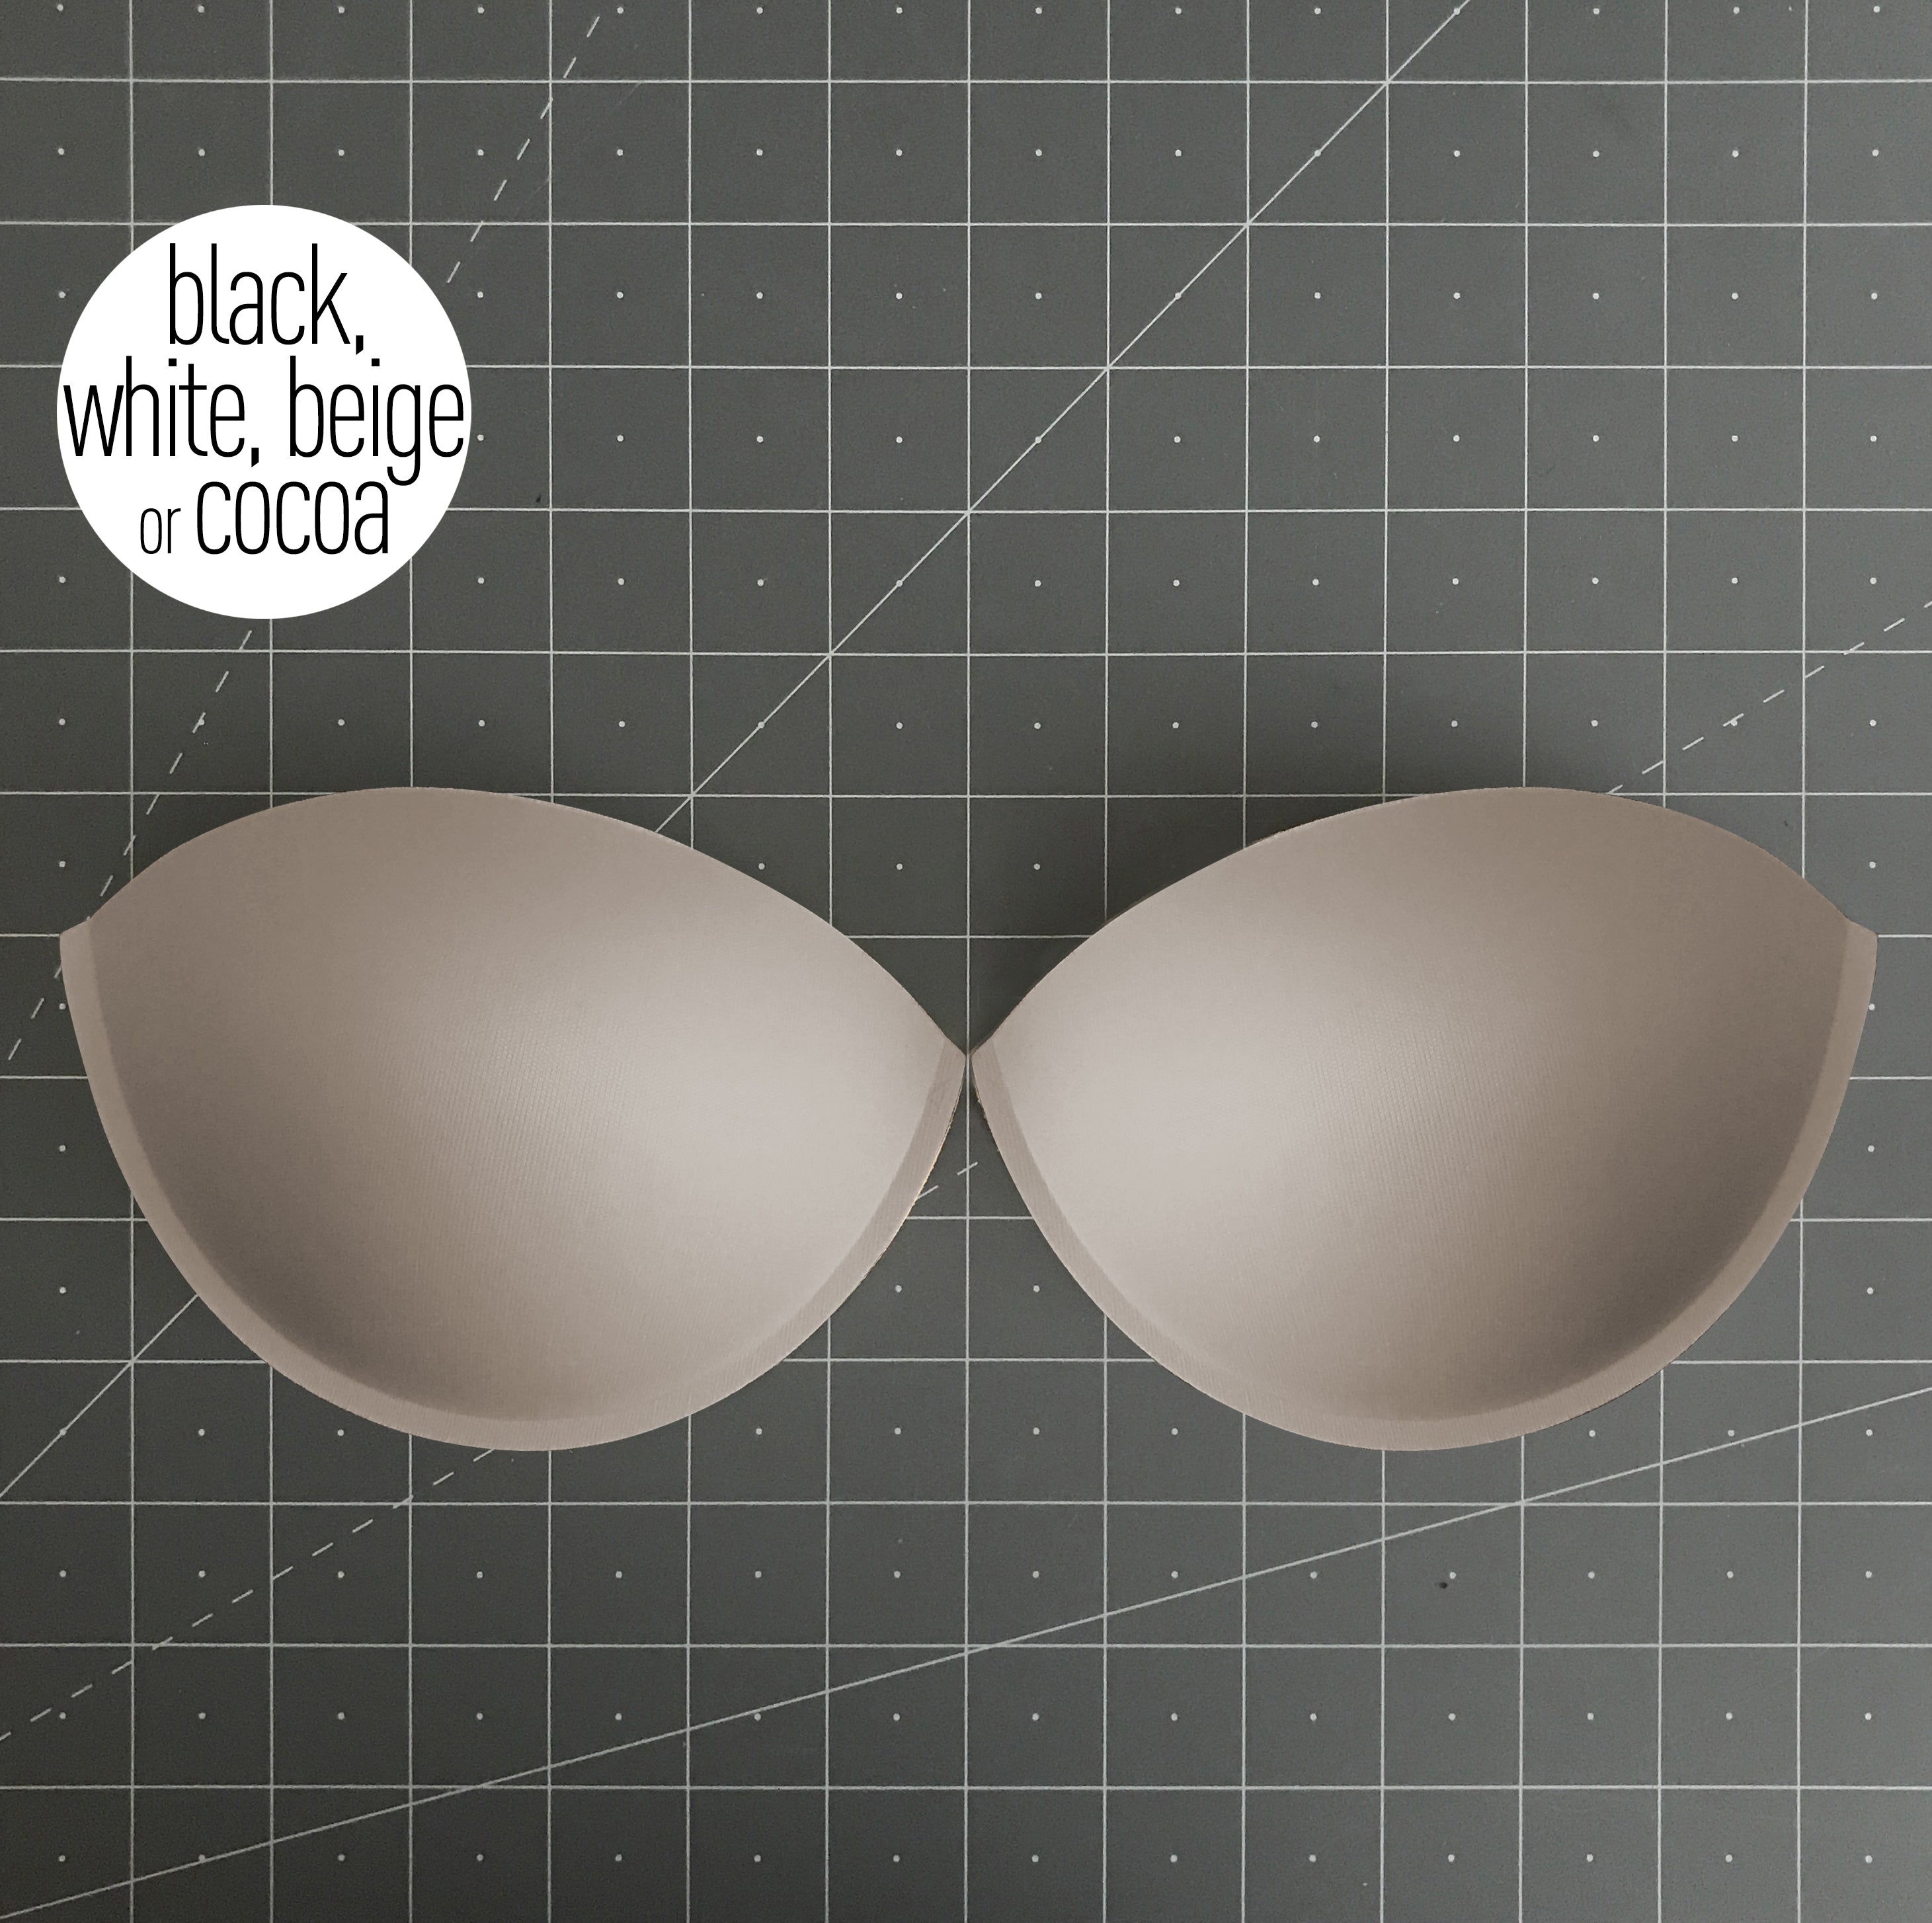 Push Up Molded Bra Cups, Almond Shaped with Seam, Inserts or Sewn